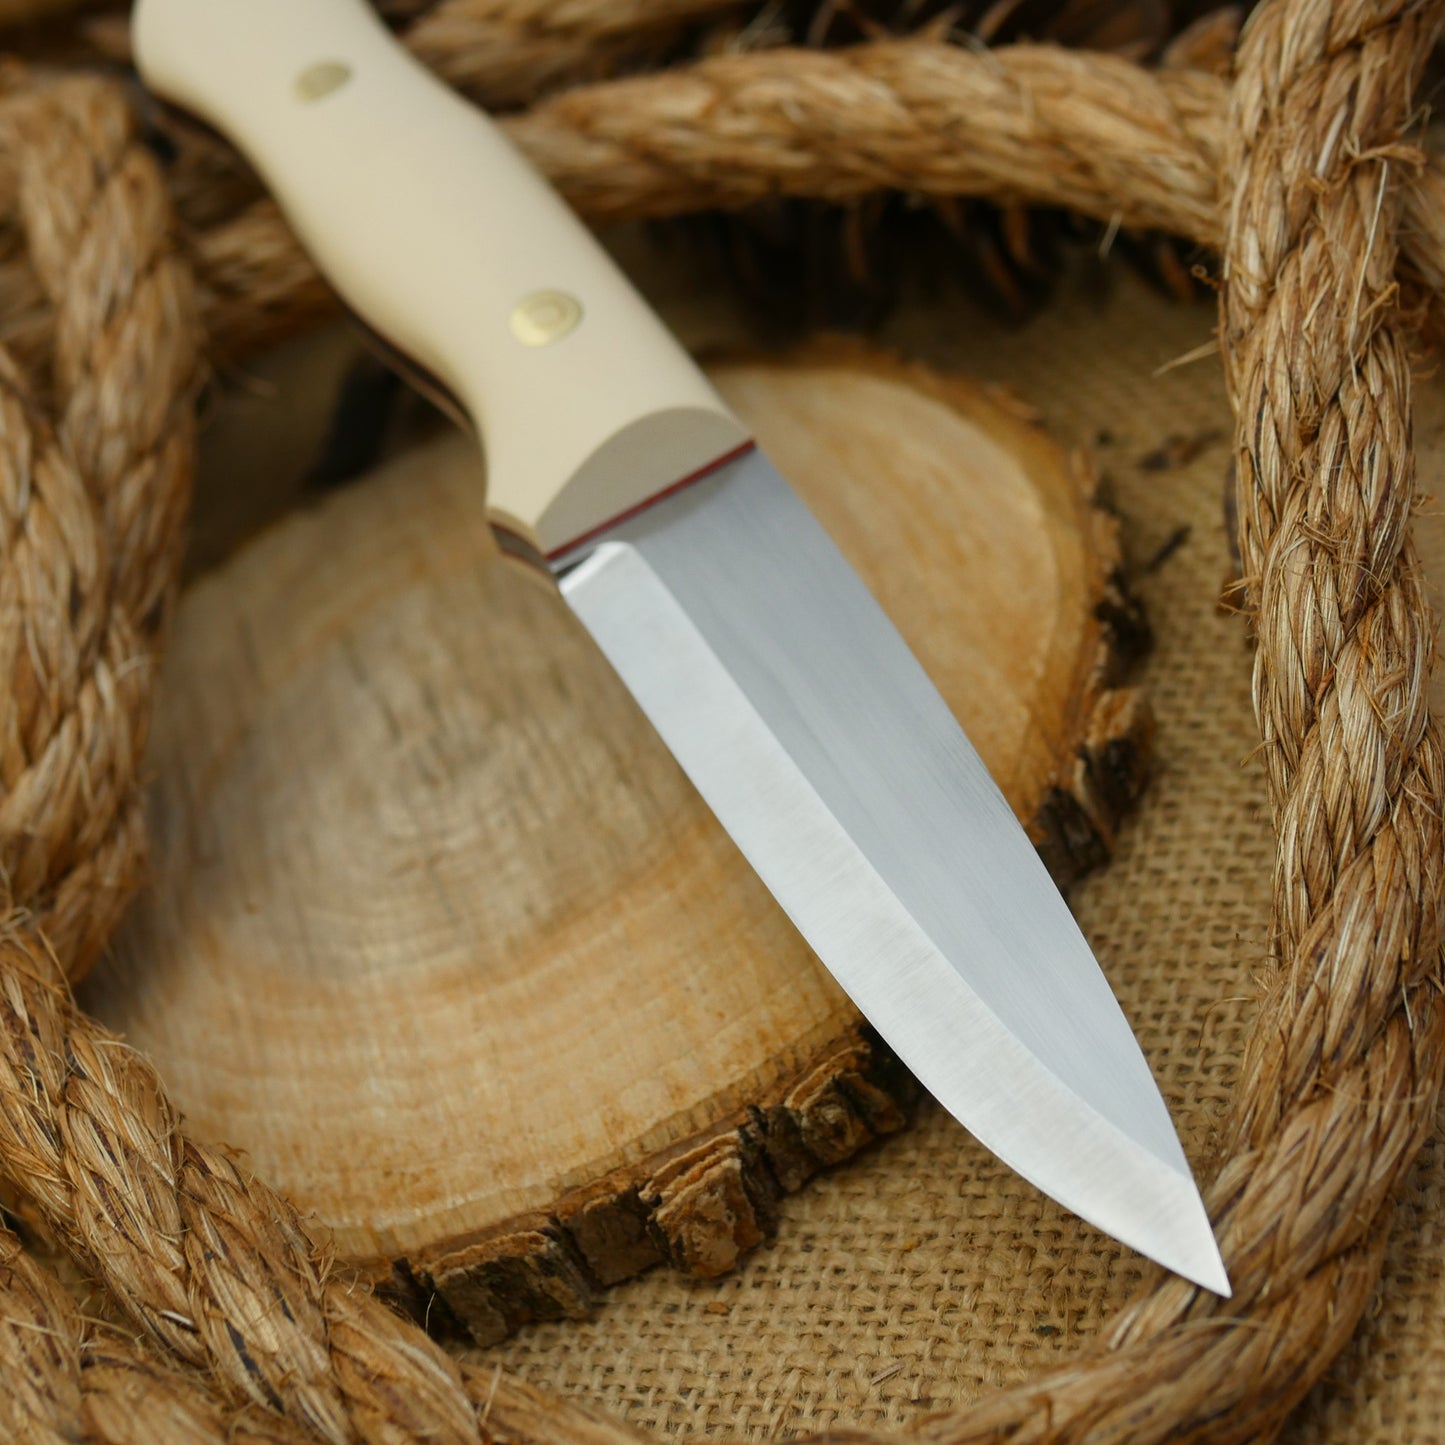 An Adventure Sworn Mountaineer with ivory paper handle scales and cinnamon red liners